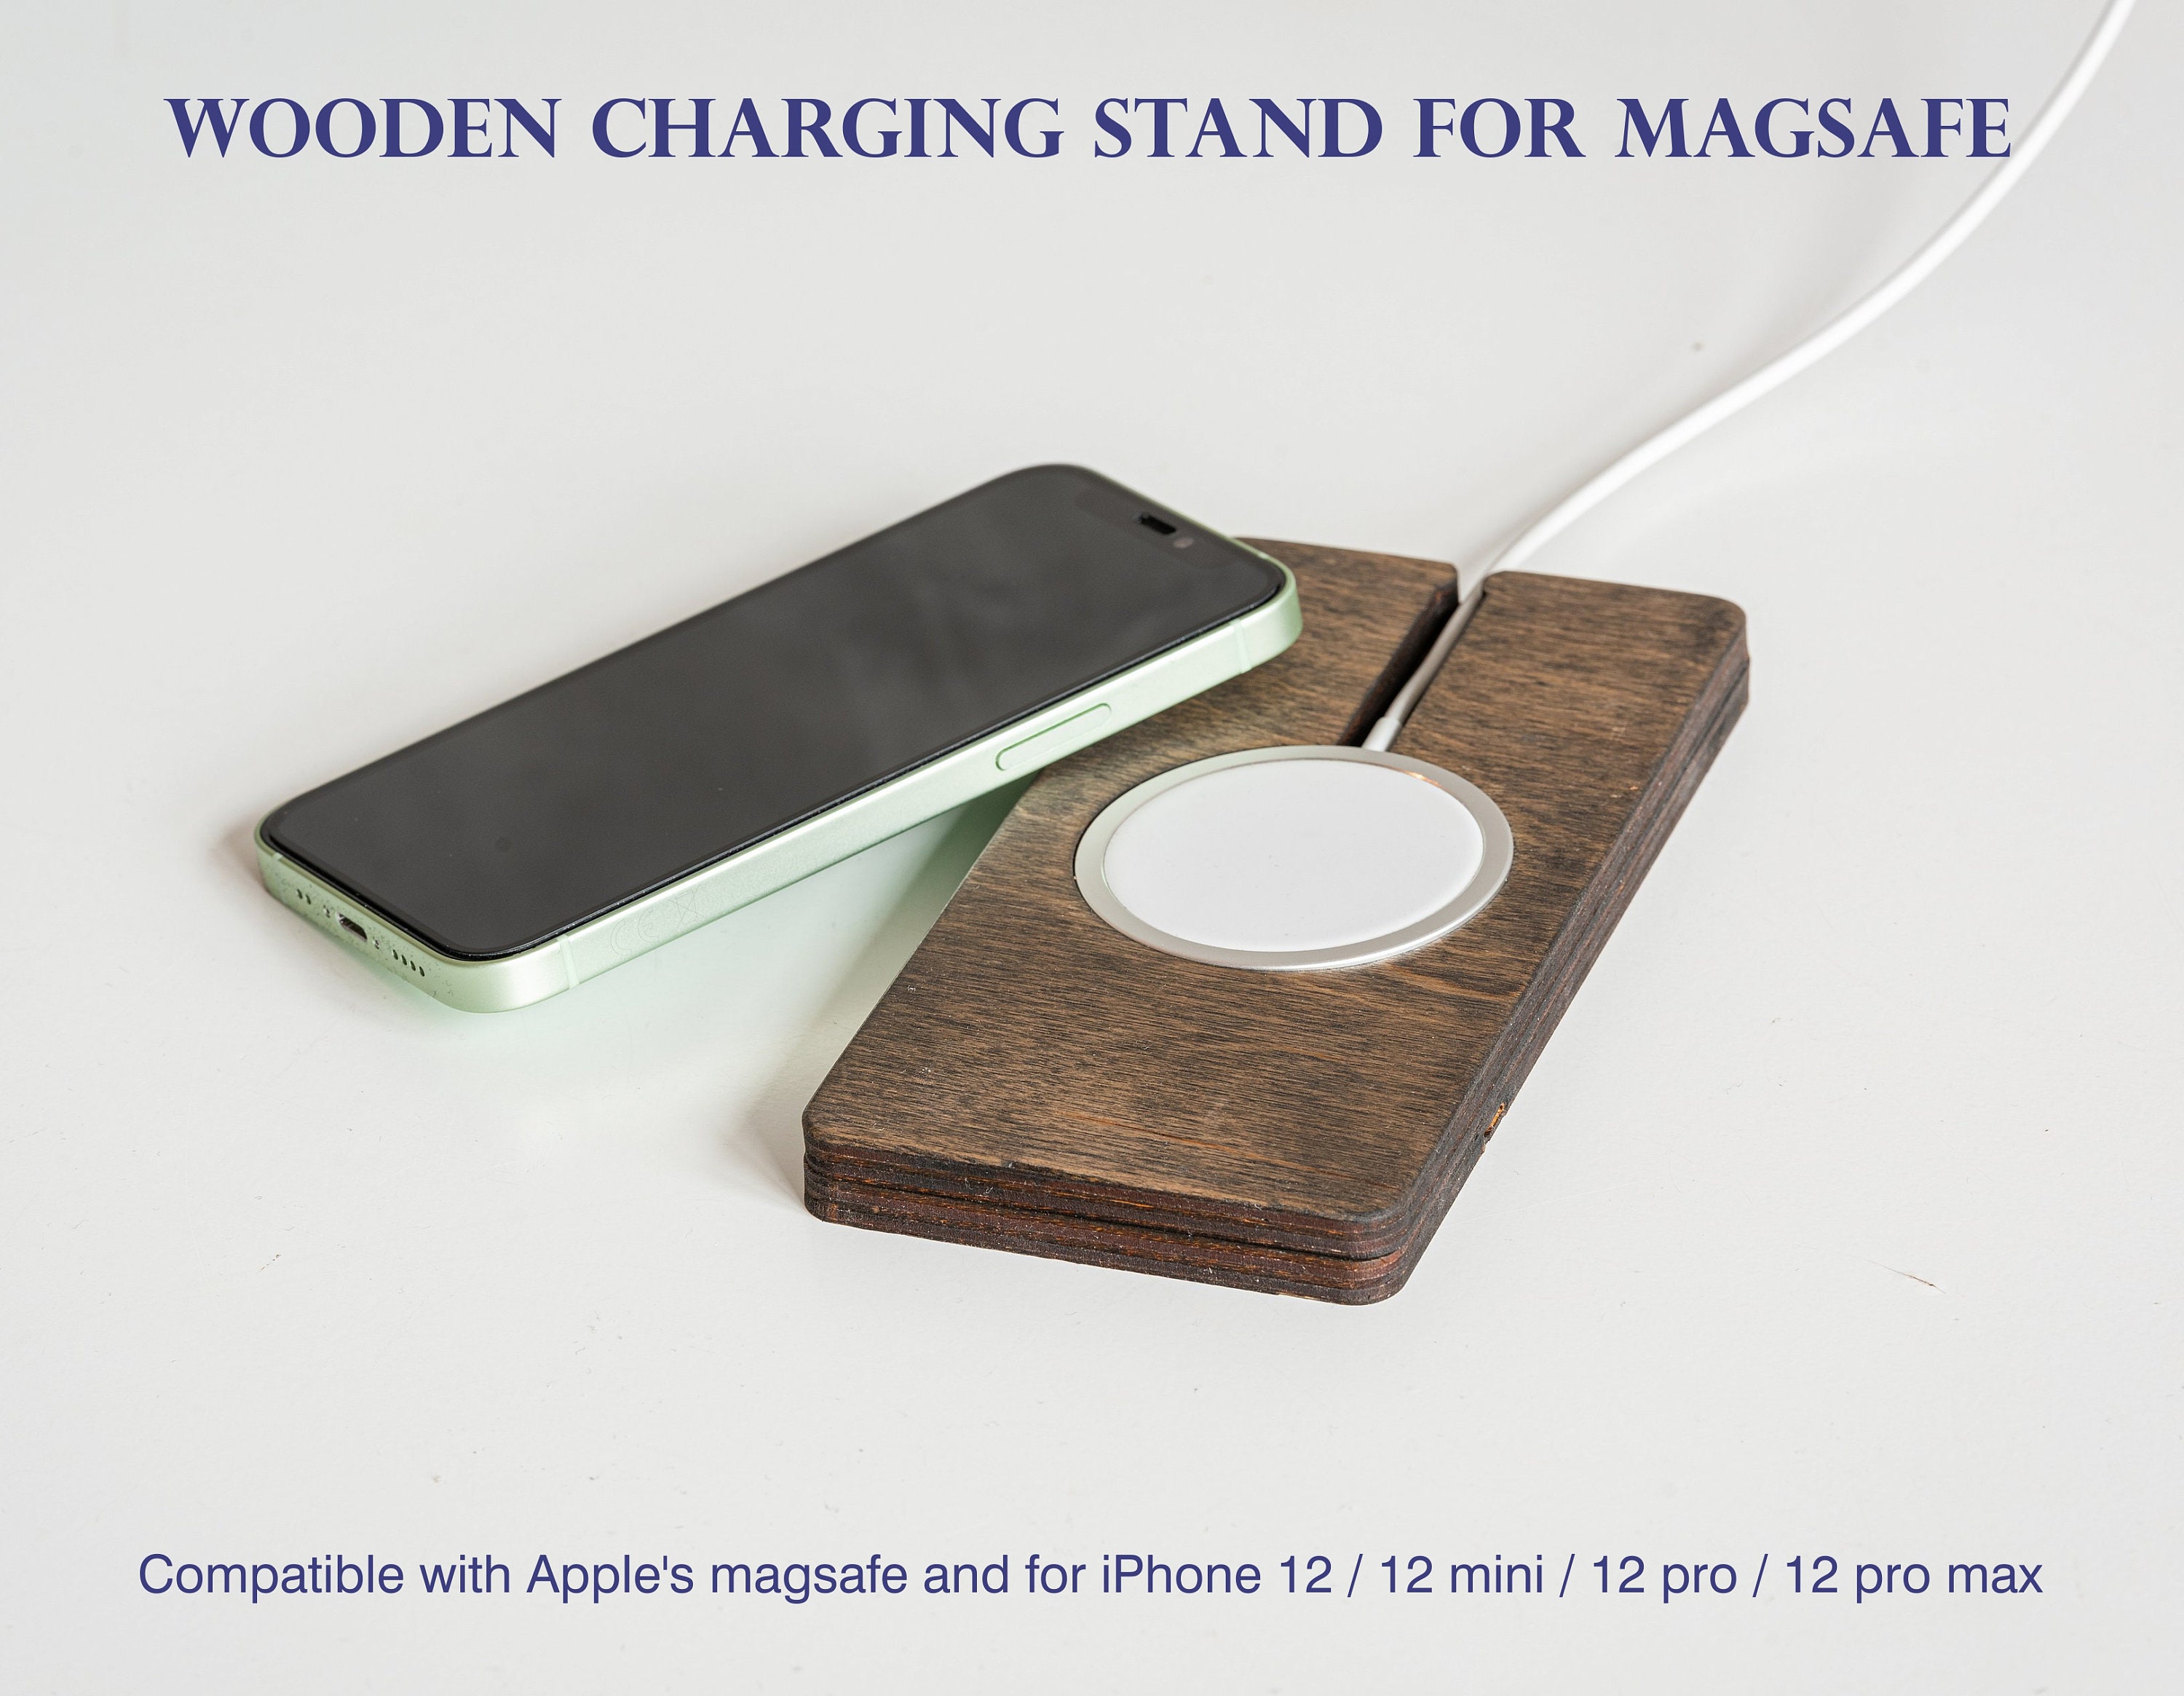 Wooden Charging Stand for Magsafe, Phone Stand, iPhone Magsafe